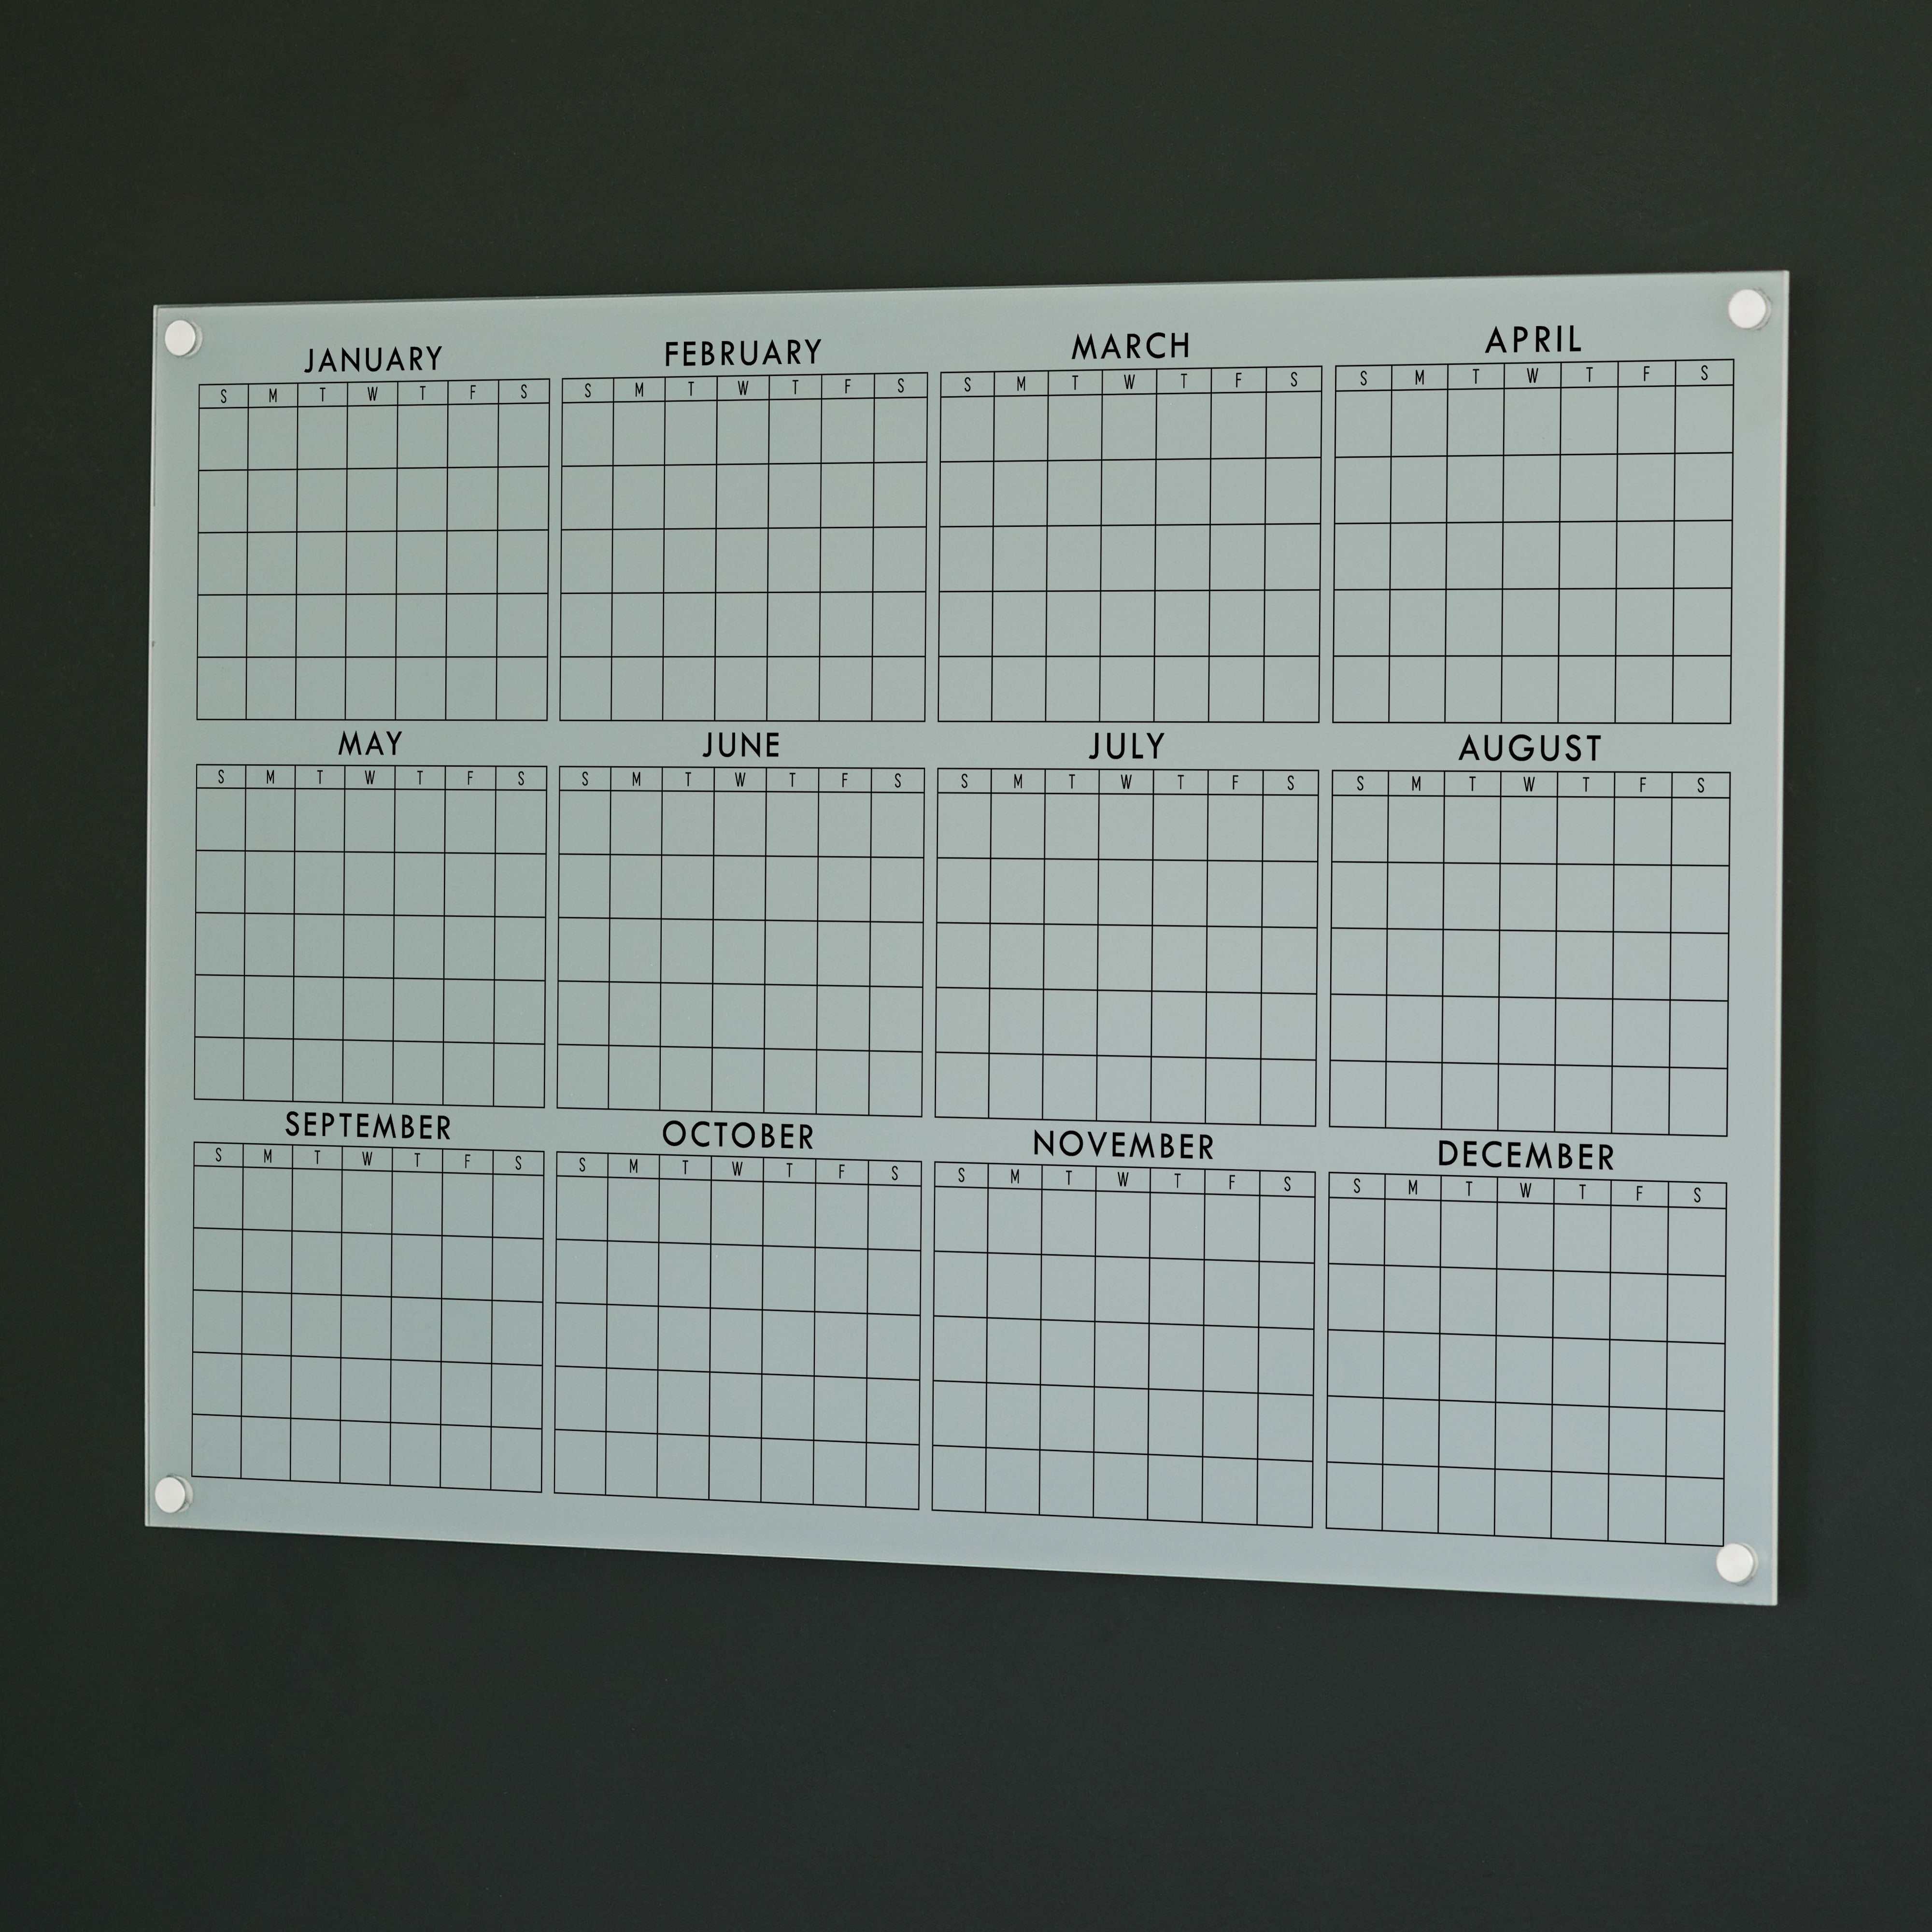 A dry-erase yearly calendar made of acrylic hanging up on the wall